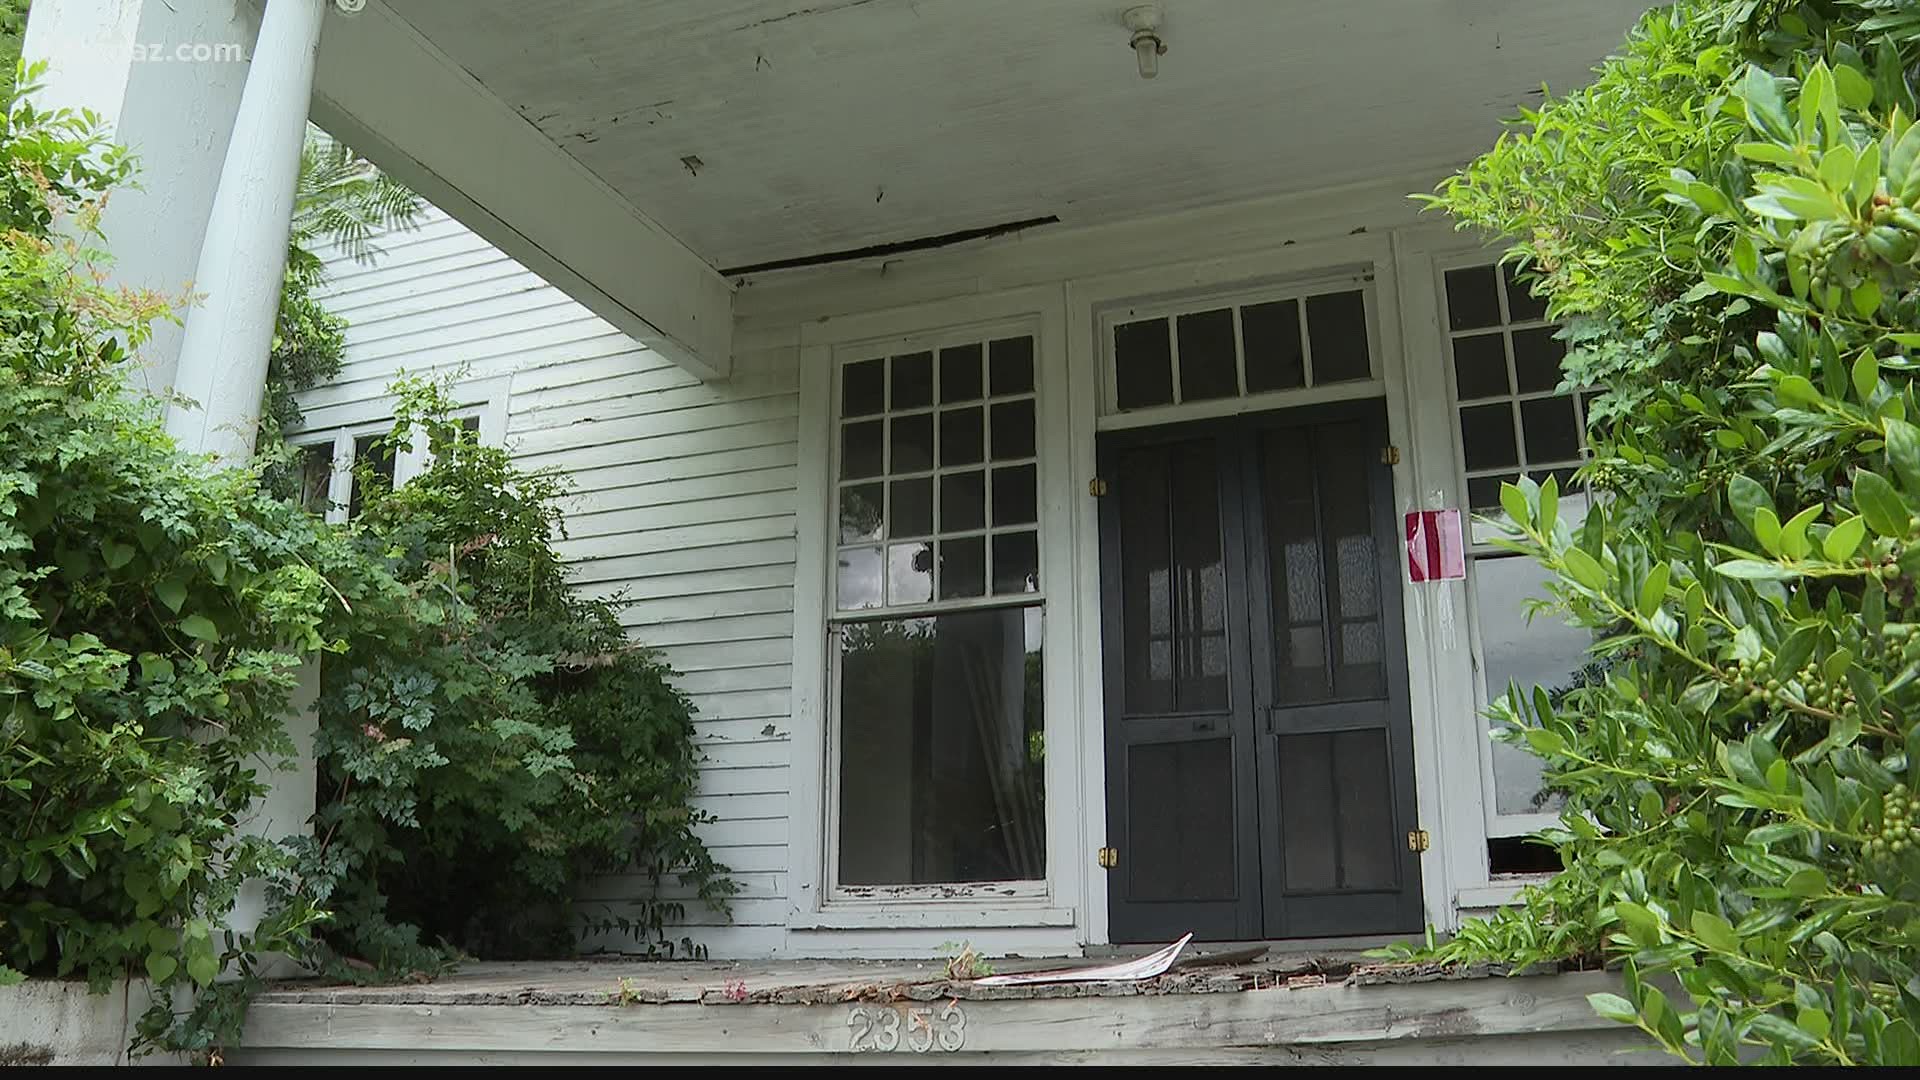 Some folks are frustrated because a blighted home in the Historic Vineville neighborhood could be torn down.